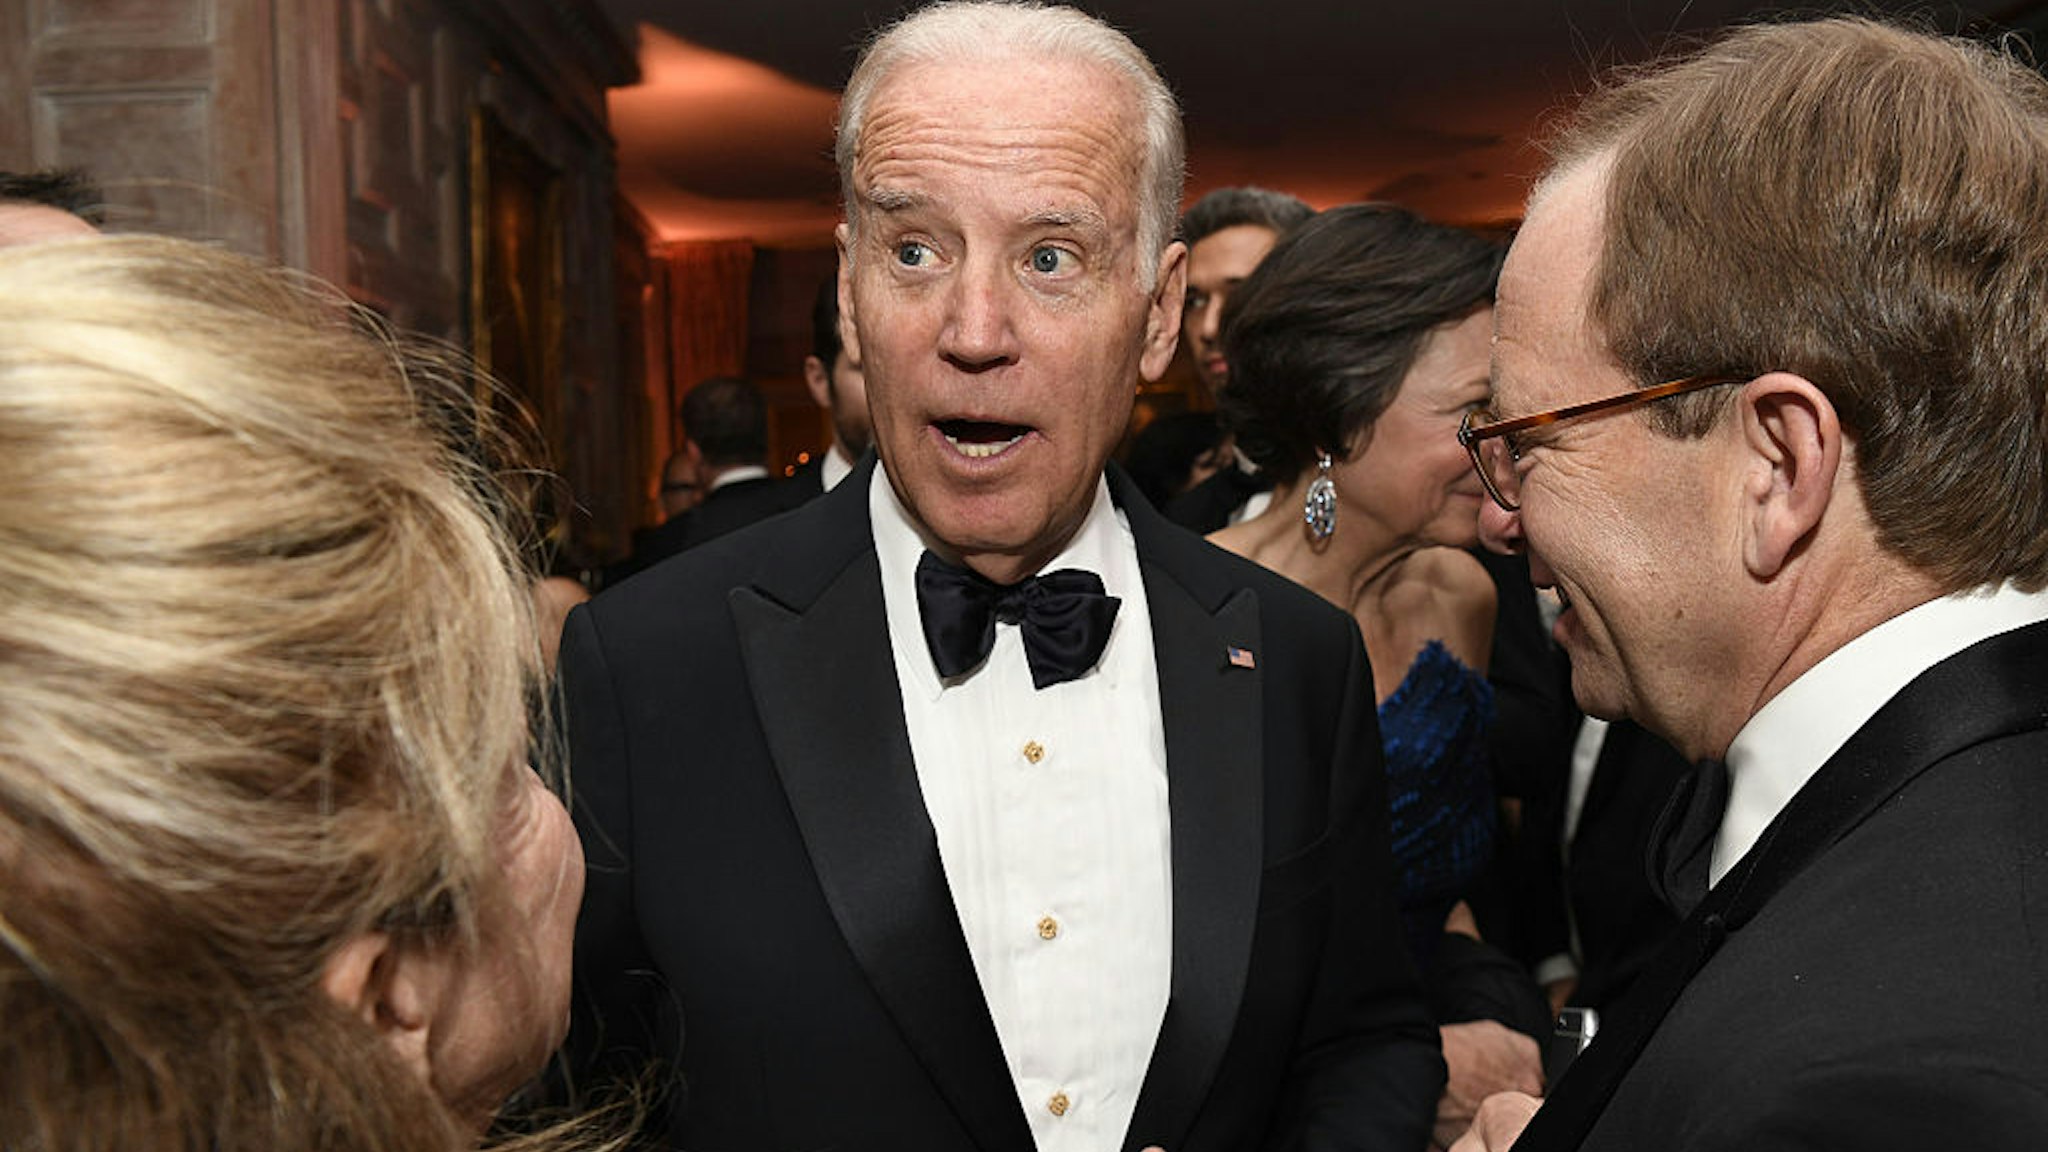 Vice President Joseph "Joe" Biden, center, attends the Bloomberg Vanity Fair White House Correspondents' Association (WHCA) dinner afterparty in Washington, D.C., U.S., on Saturday, April 30, 2016. The 102nd WHCA raises money for scholarships and honors the recipients of the organization's journalism awards. Photographer: David Paul Morris/Bloomberg via Getty Images